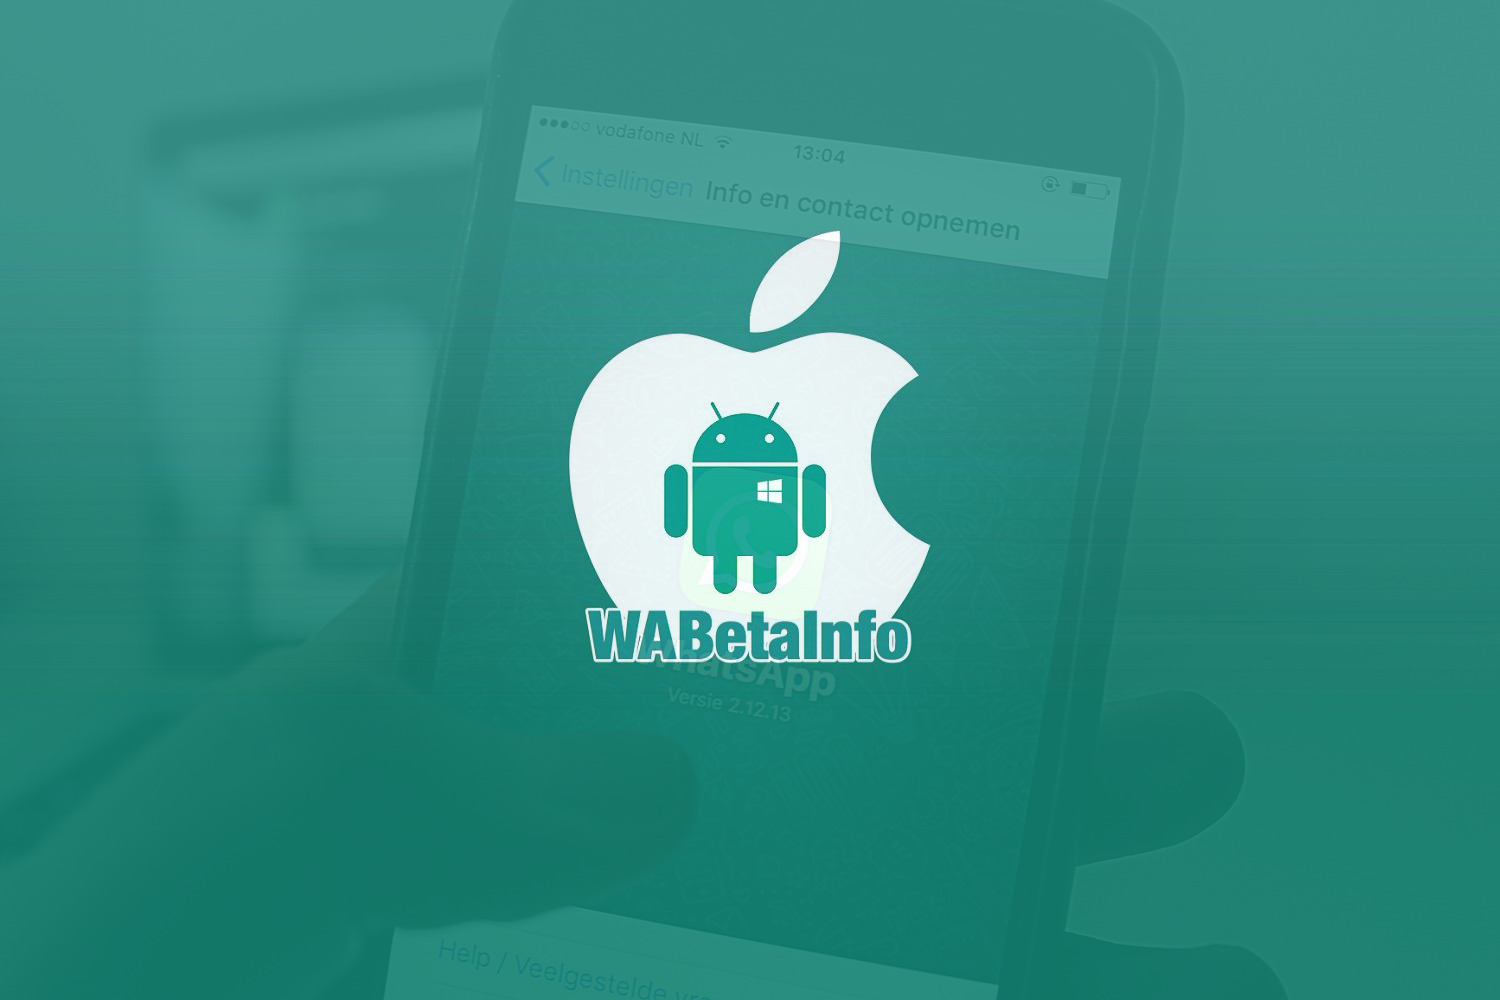 Tips And Insights From WABetaInfo, One Of The Best Sources Of WhatsApp News And Updates